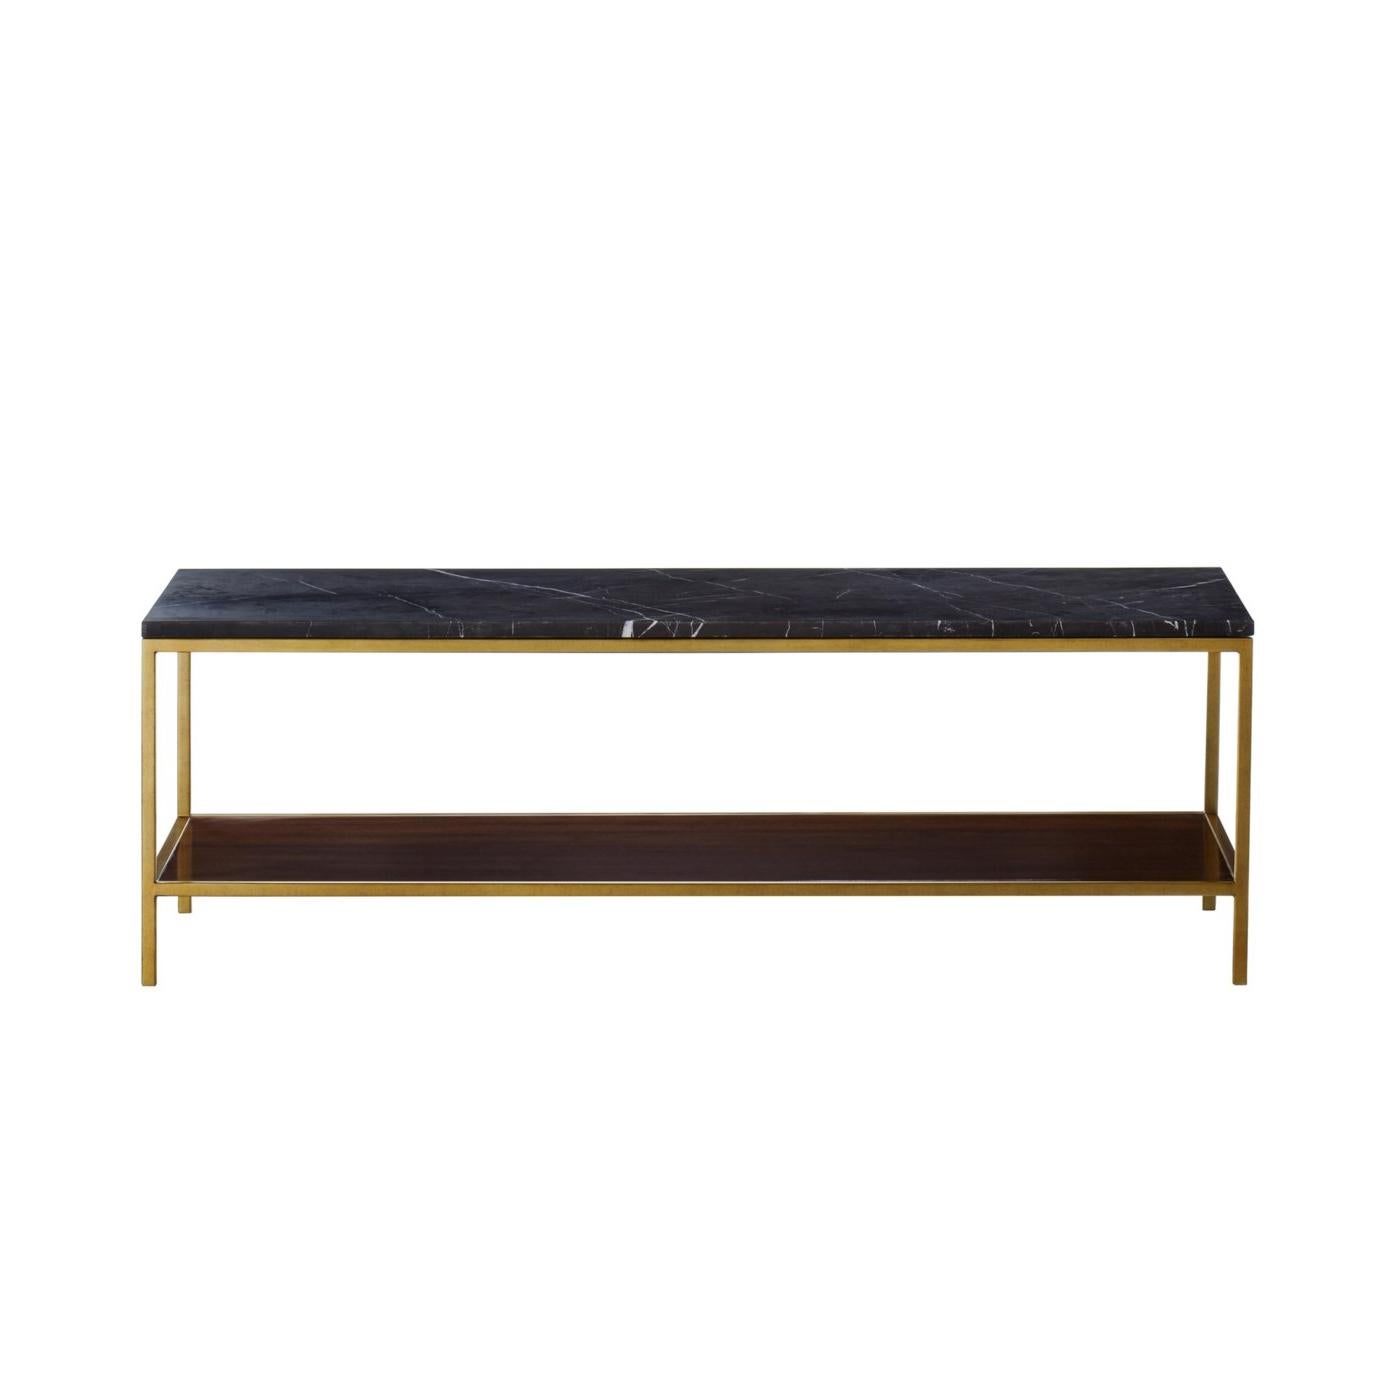 Long coffee table Carolina with structure in metal in brass
finish with solid oak and walnut structure. With black
marquina marble top.